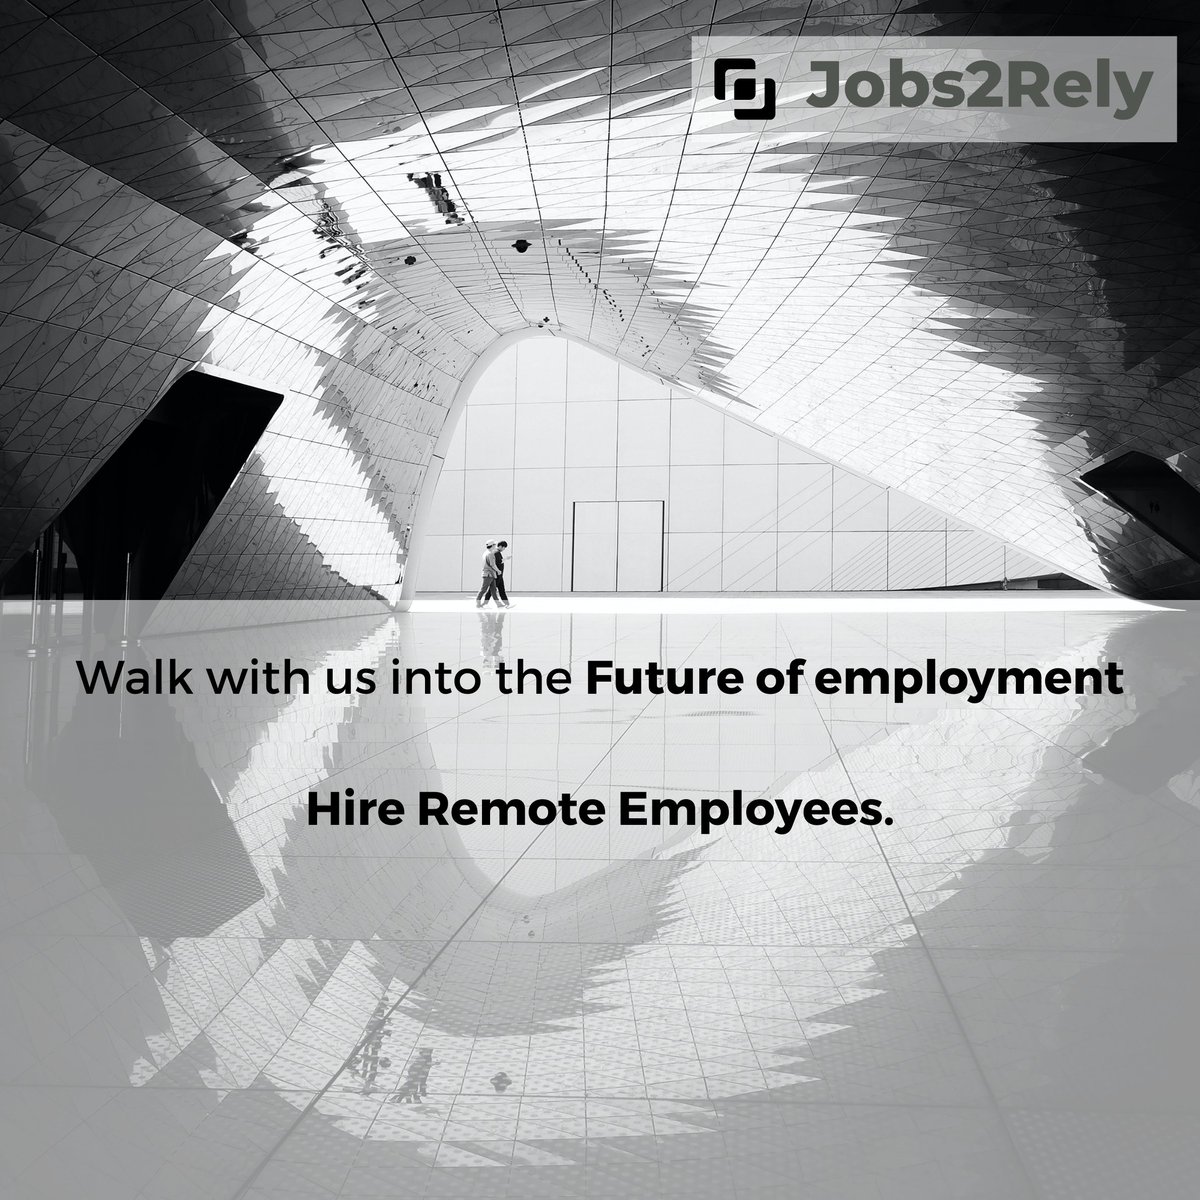 Embrace the Future of Employment: Connect with Talent Worldwide, Hire Remote Employees Today
#workfromhome #hiring
#remotework #remotejobs
#NoMoreLayoffs #Jobs2Rely #lovewhereyouwork #savemoney #savetime #employment #employmentopportunities #employmentservices #work #data